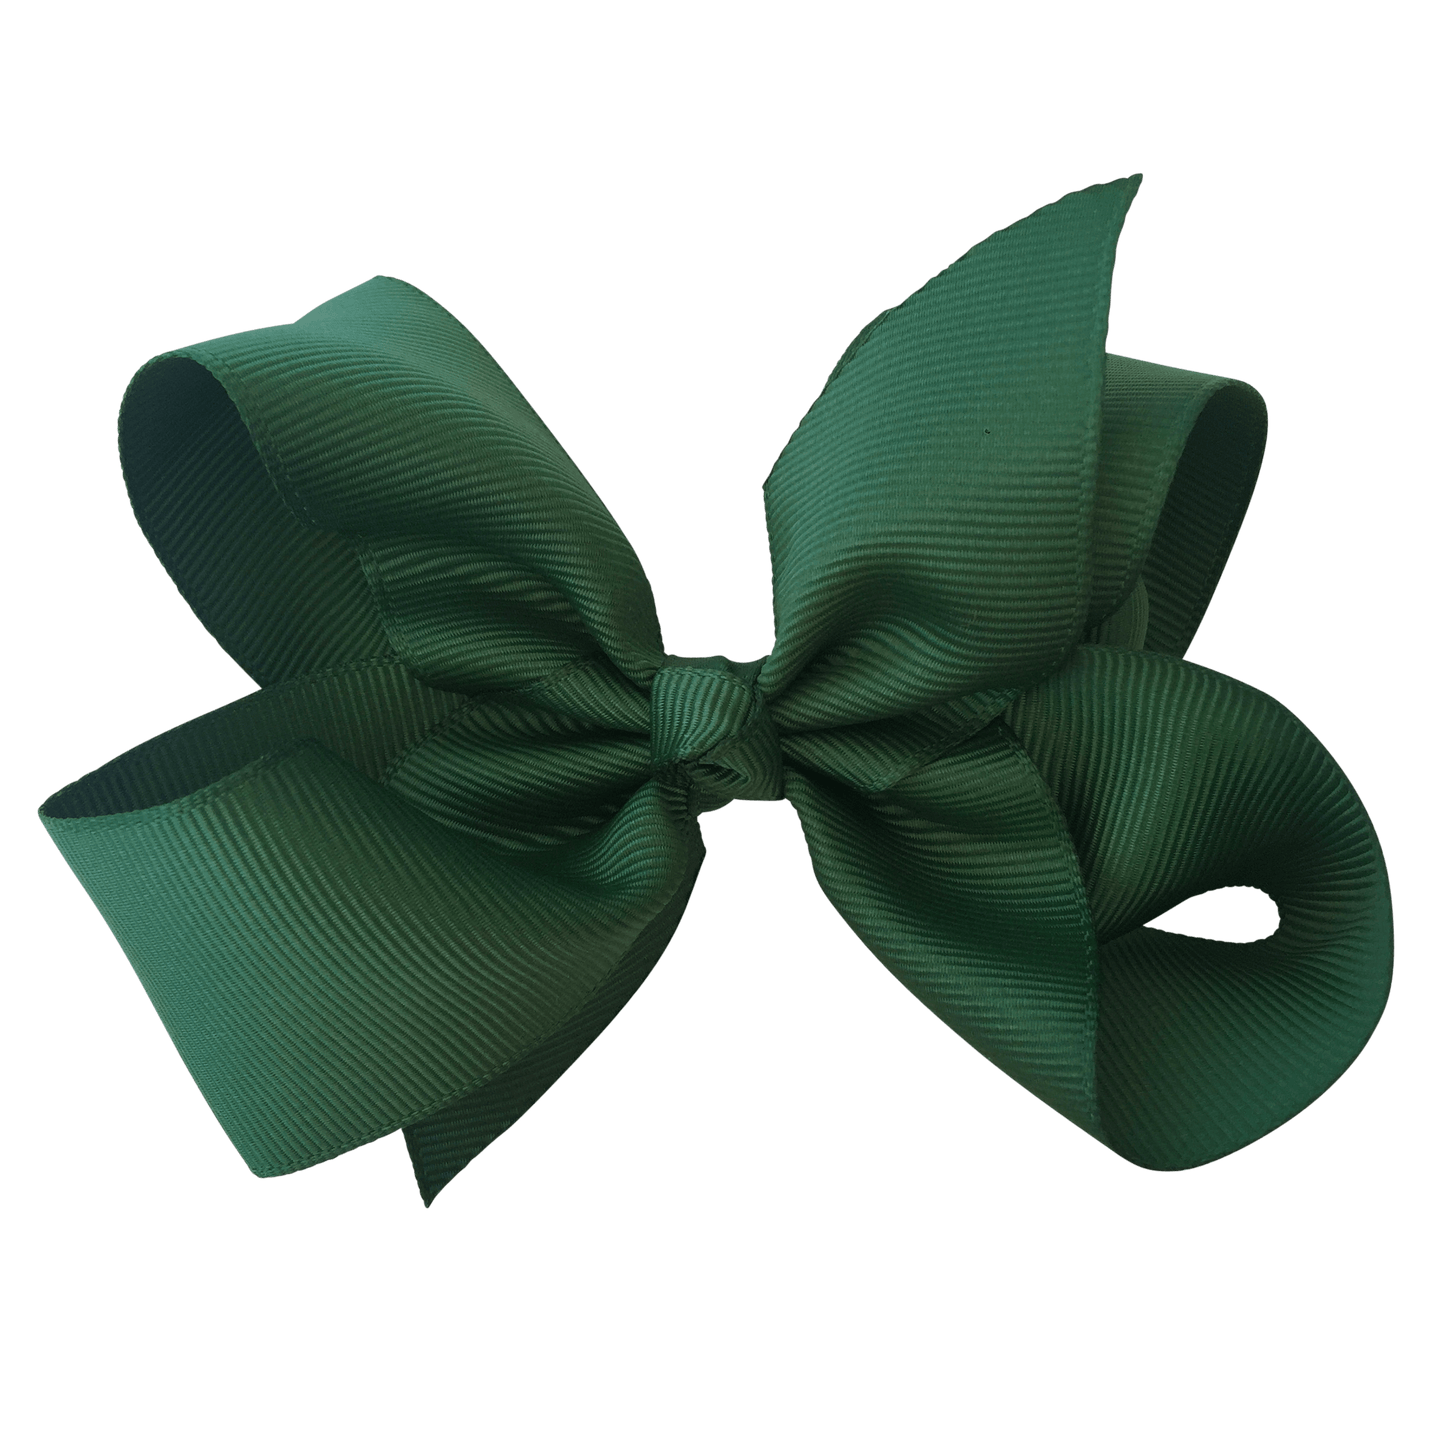 Forest Green Hair Accessories - Ponytails and Fairytales